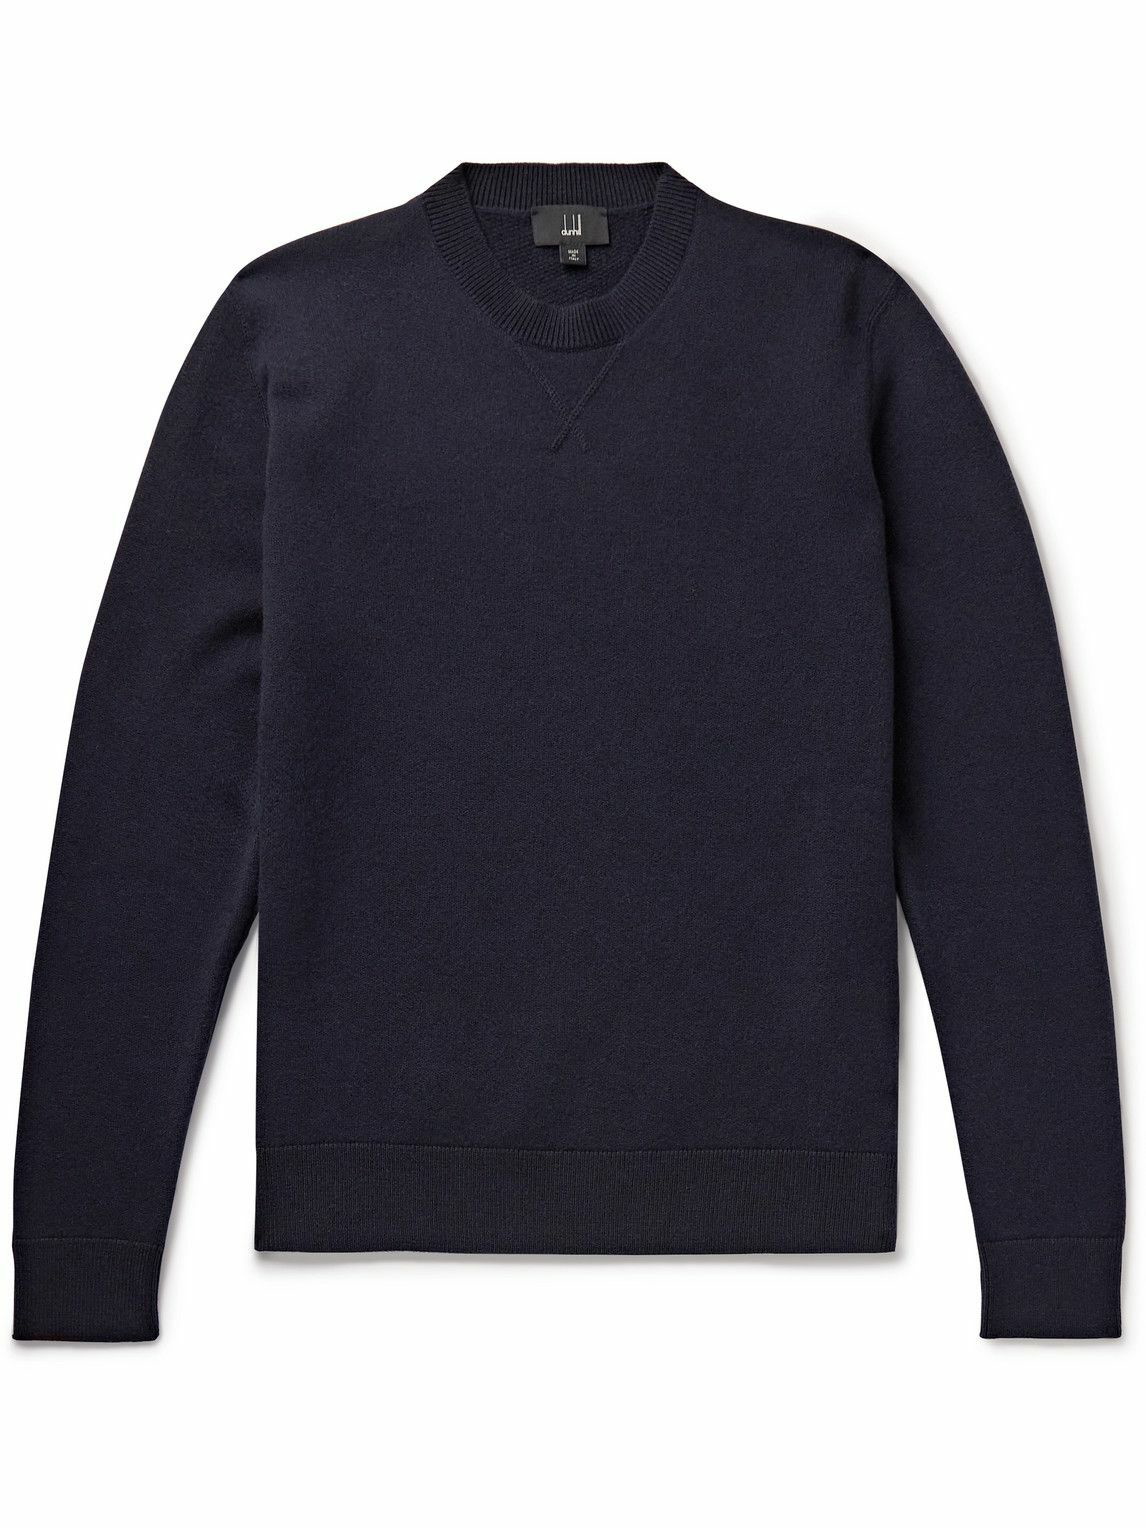 Dunhill - Slim-Fit Cashmere Sweater - Blue Dunhill